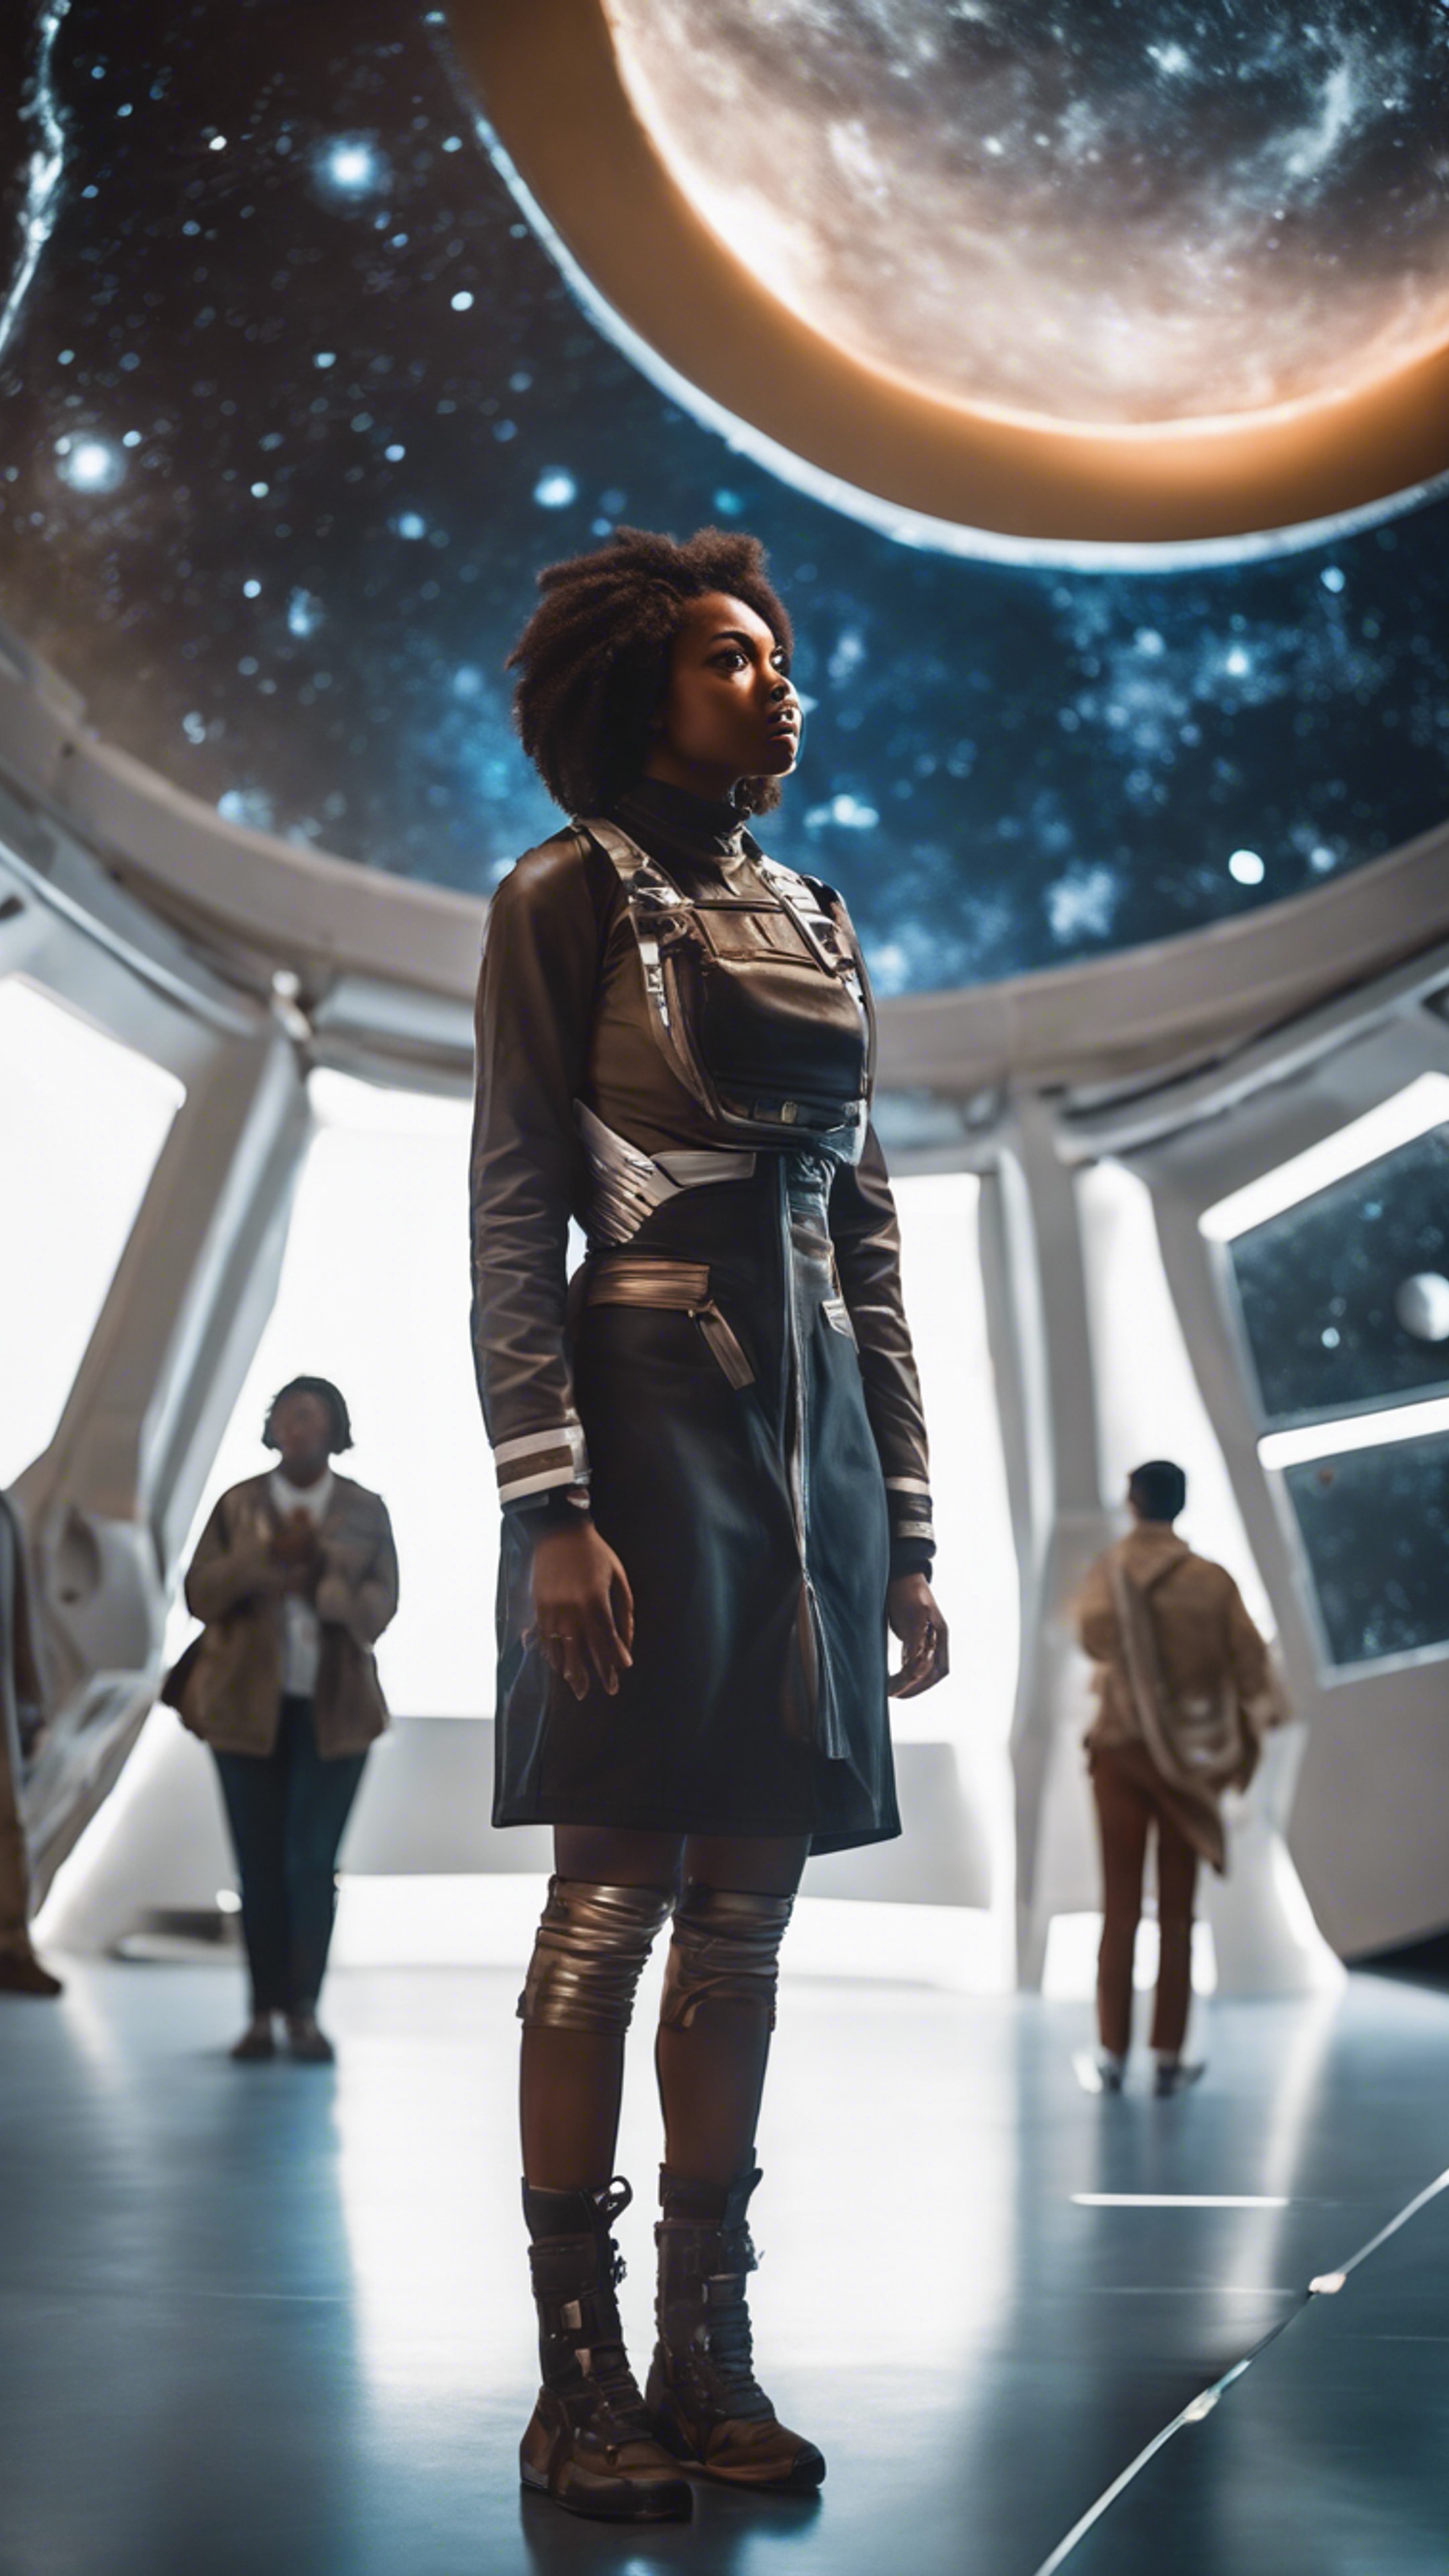 An ambitious black girl standing before a sleek spacecraft at a space museum, fascinated by the mysteries of the cosmos. Wallpaper[625b8f2cad91444c87e2]